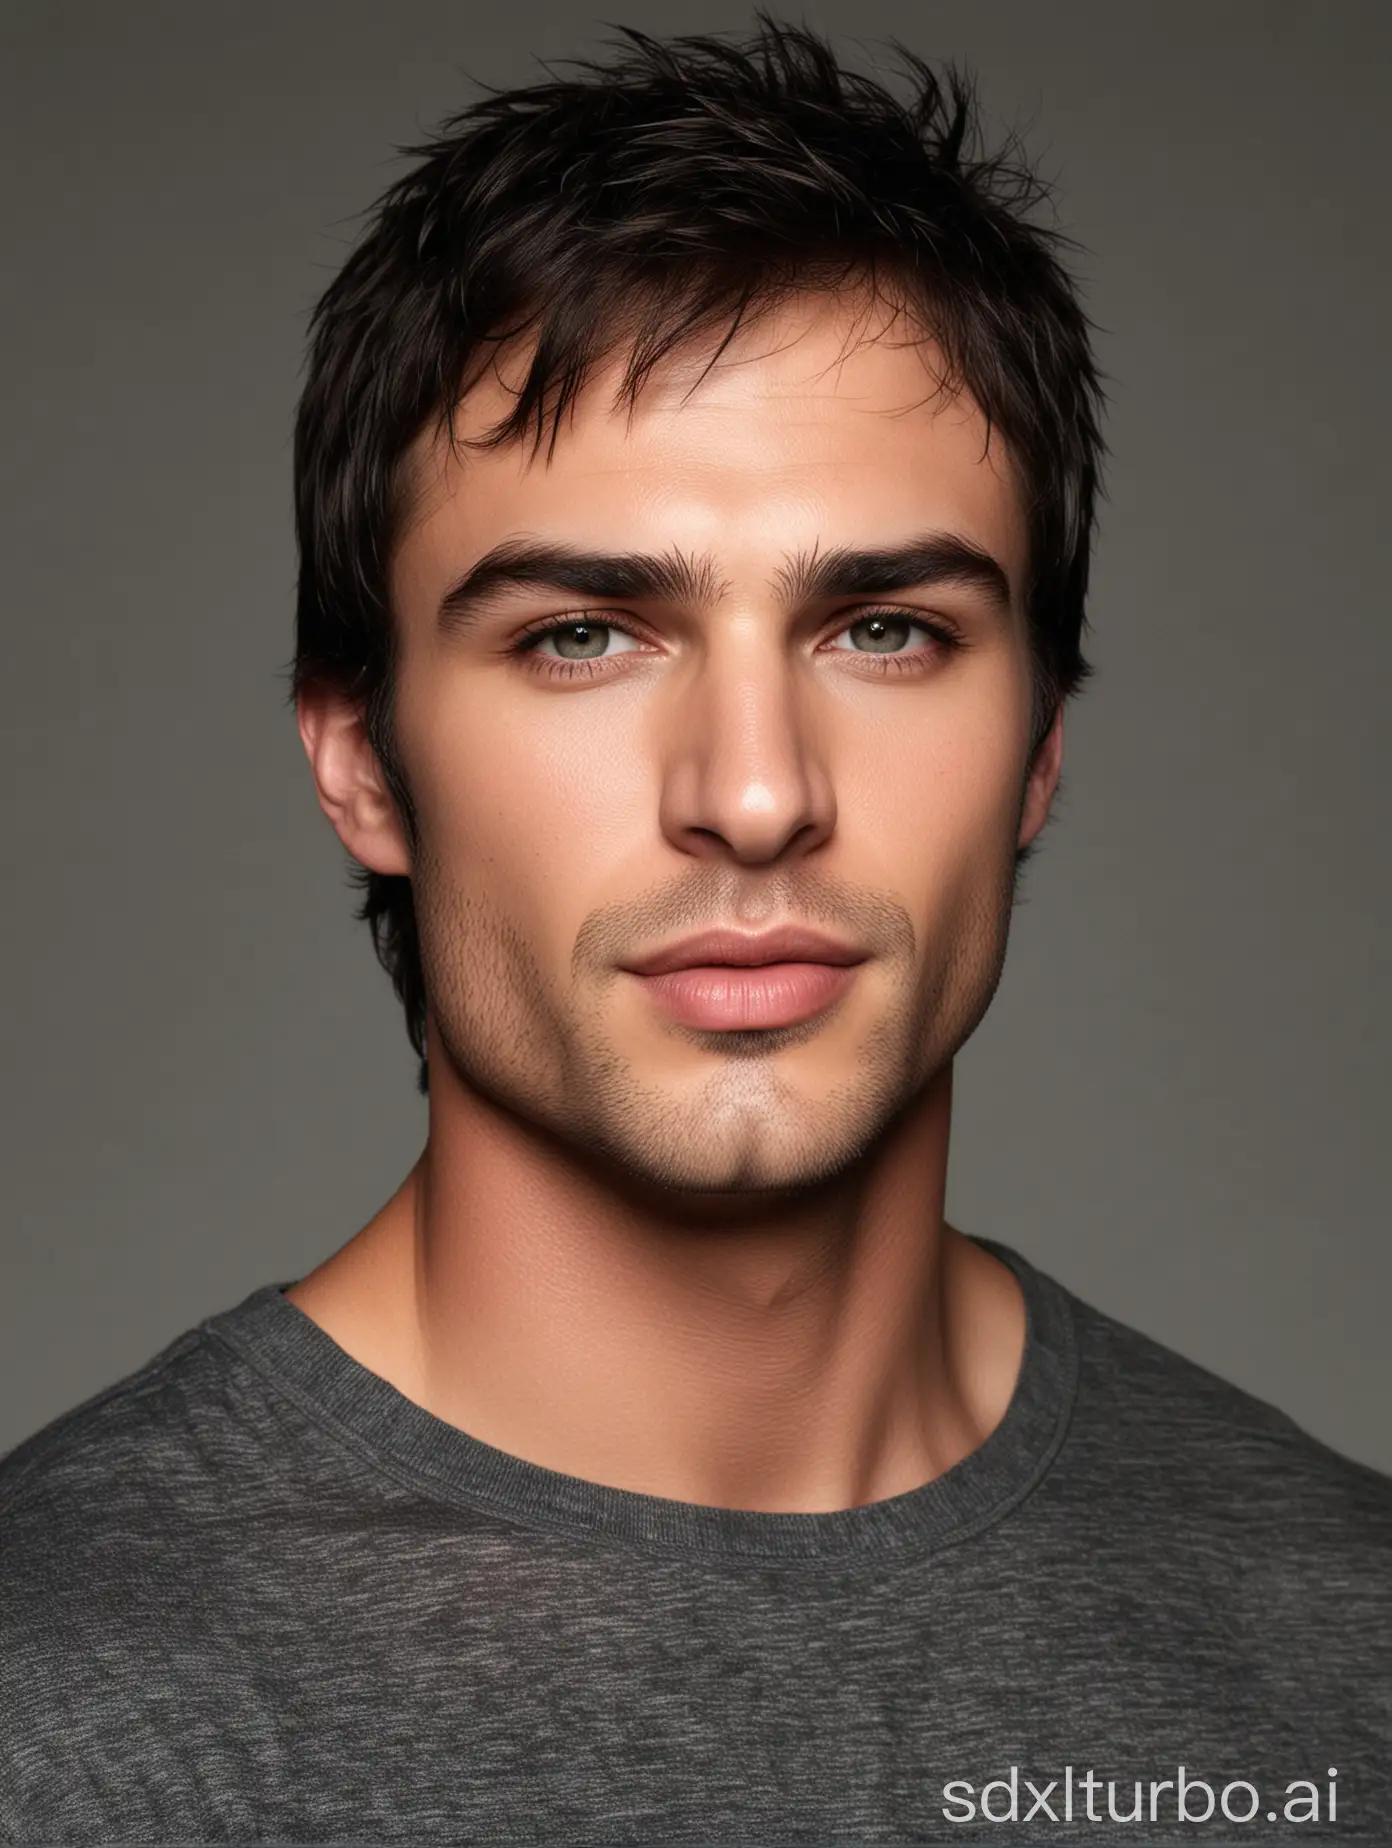 male model, realistic, features, oily skin, huge lips, face, masculine face traits, perfect nose,  look like ian somerhalder, bald